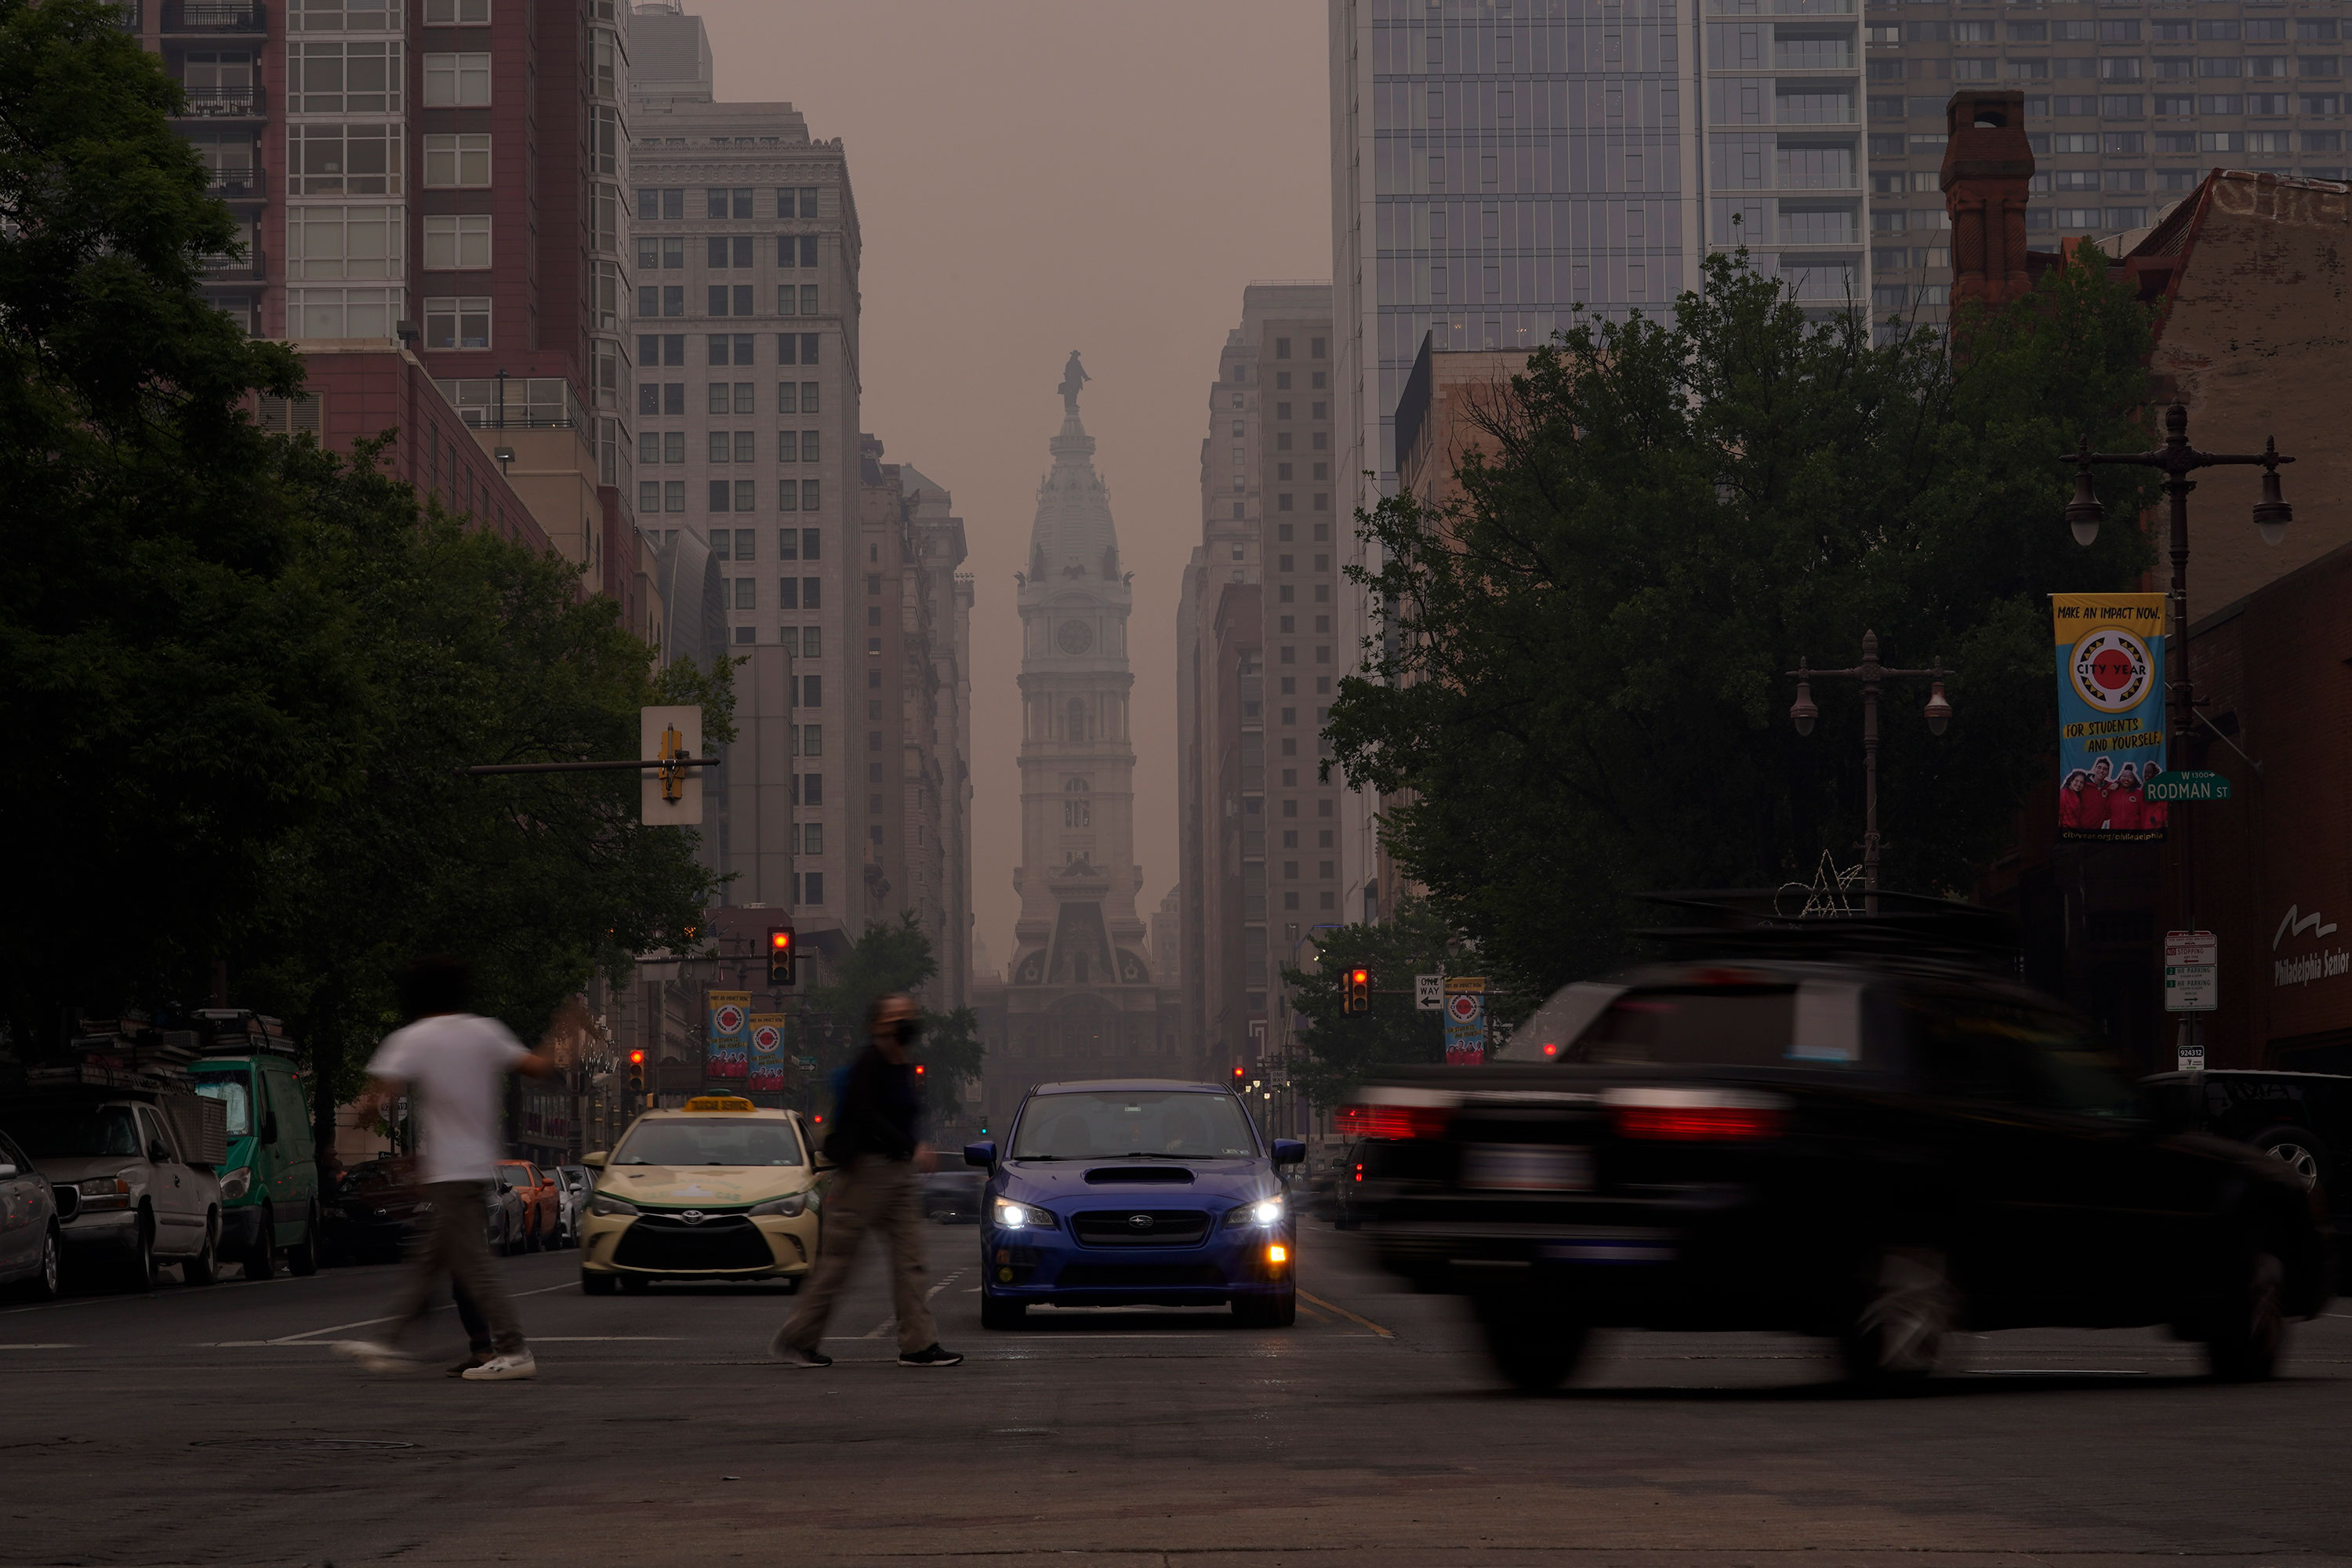 Evening commuters travel on Broad Street past a hazy City Hall in Philadelphia on Wednesday.